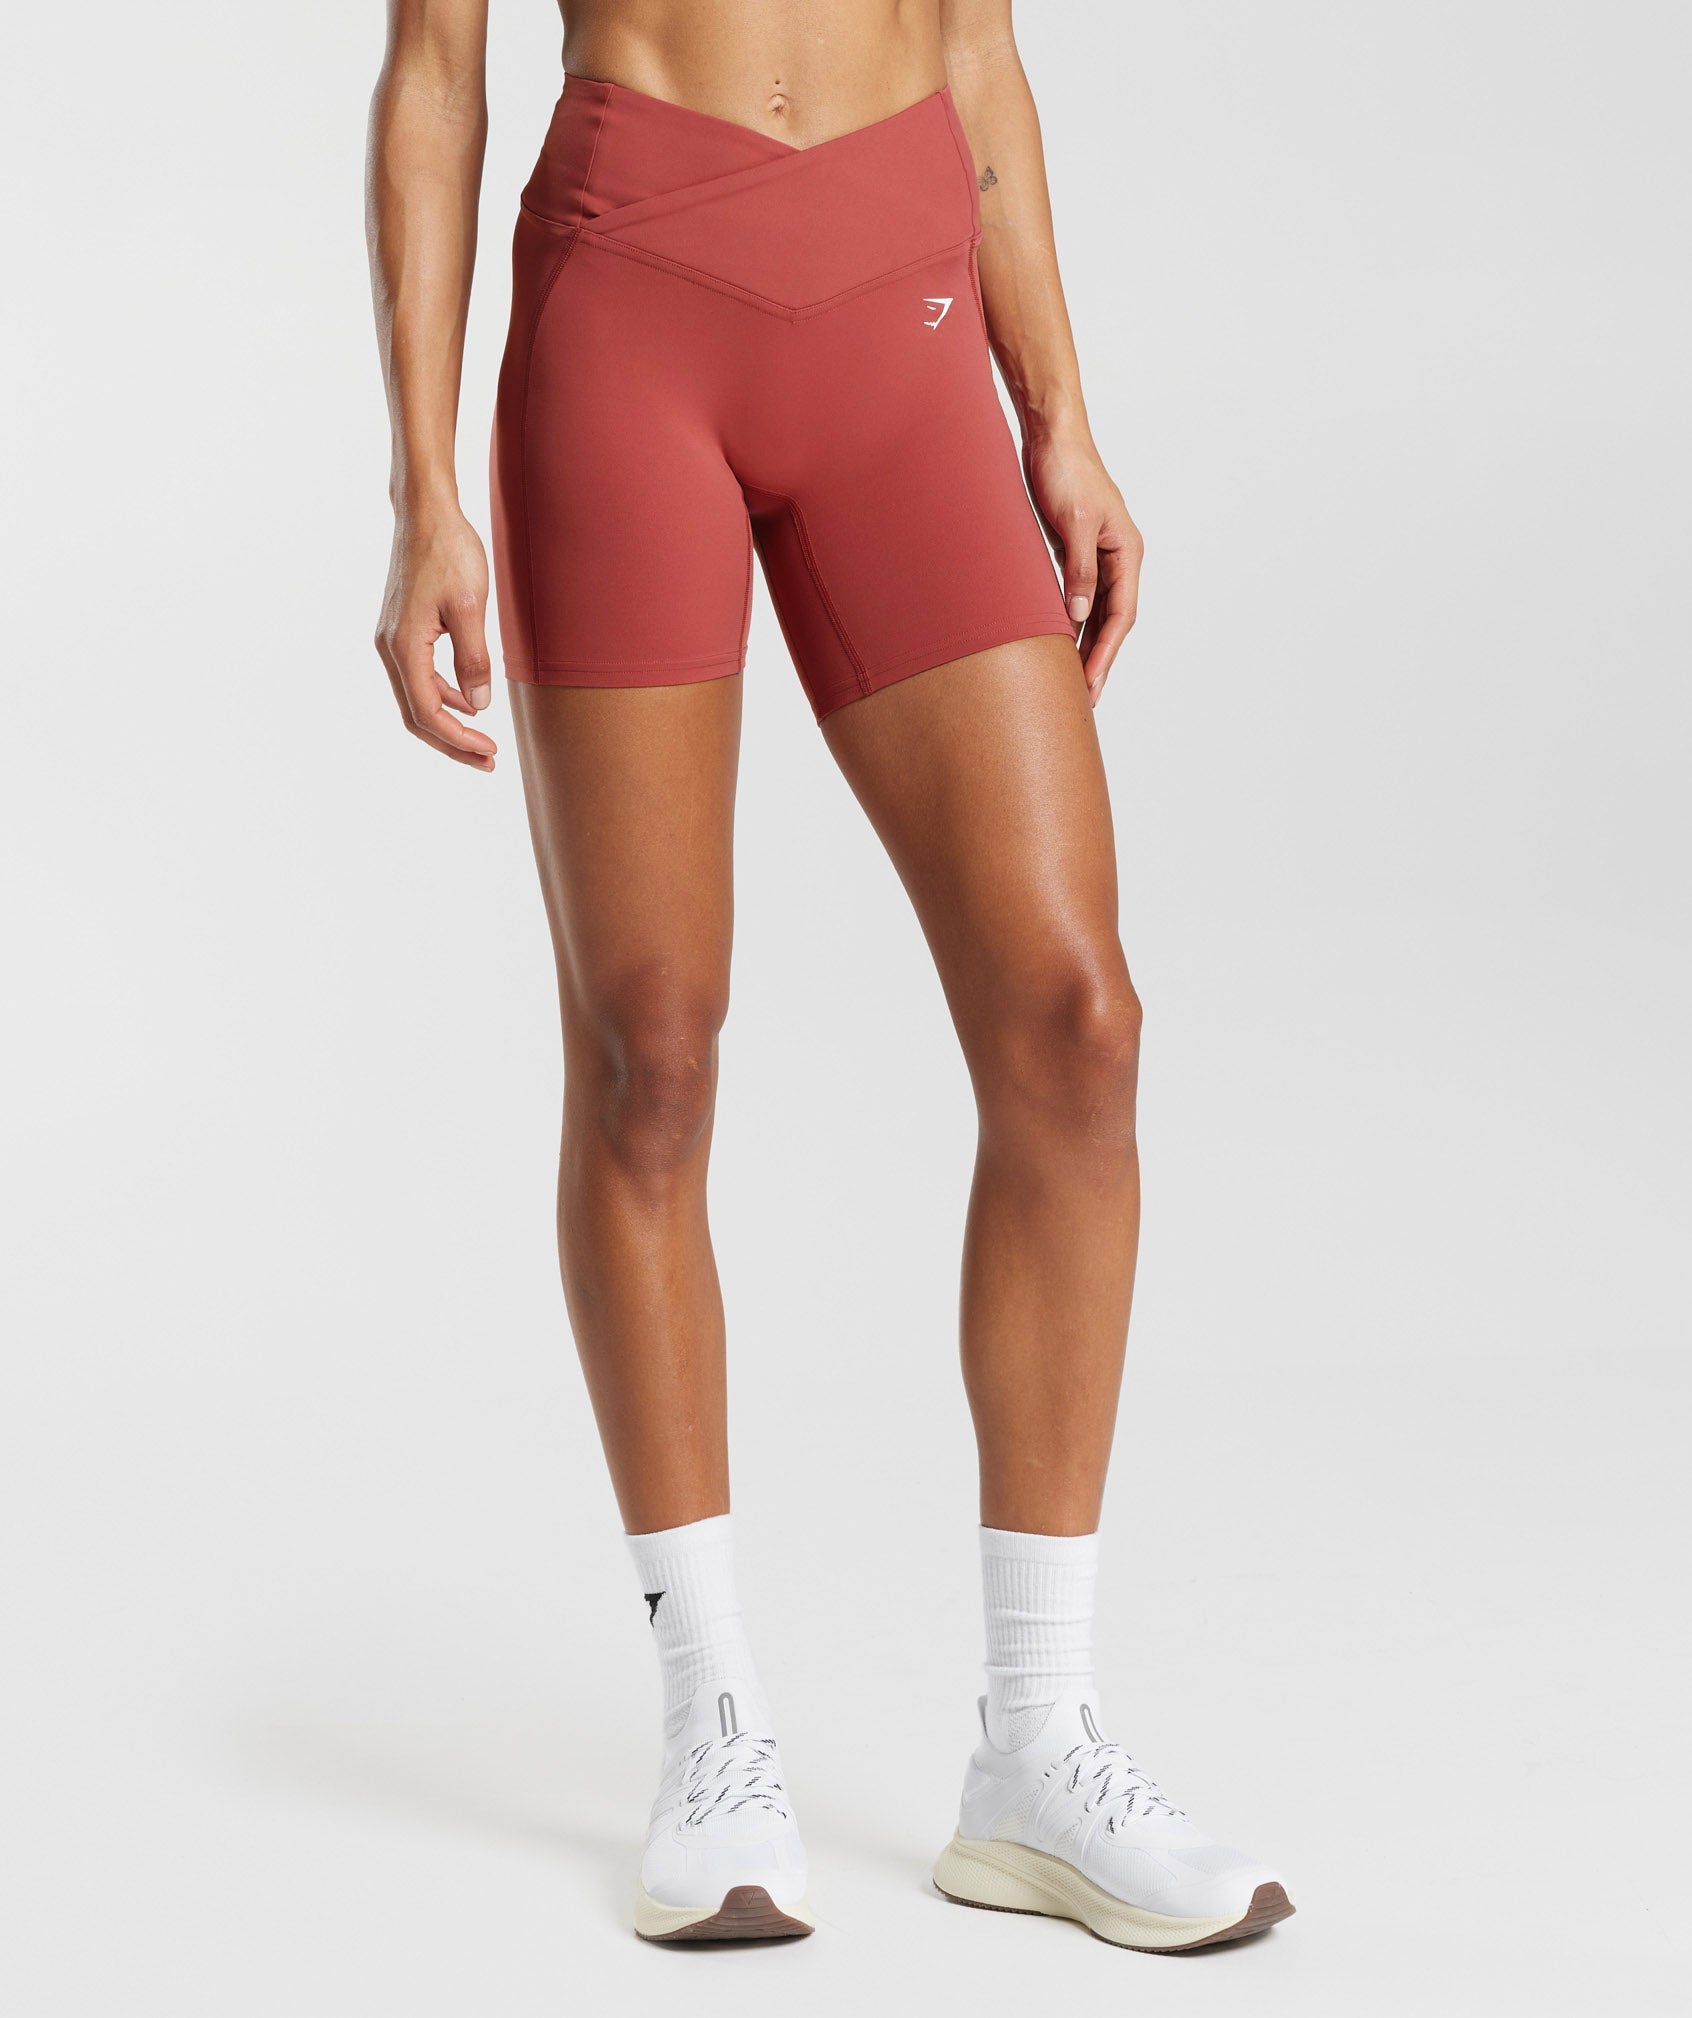 Gymshark Crossover Shorts - Pomegranate Red